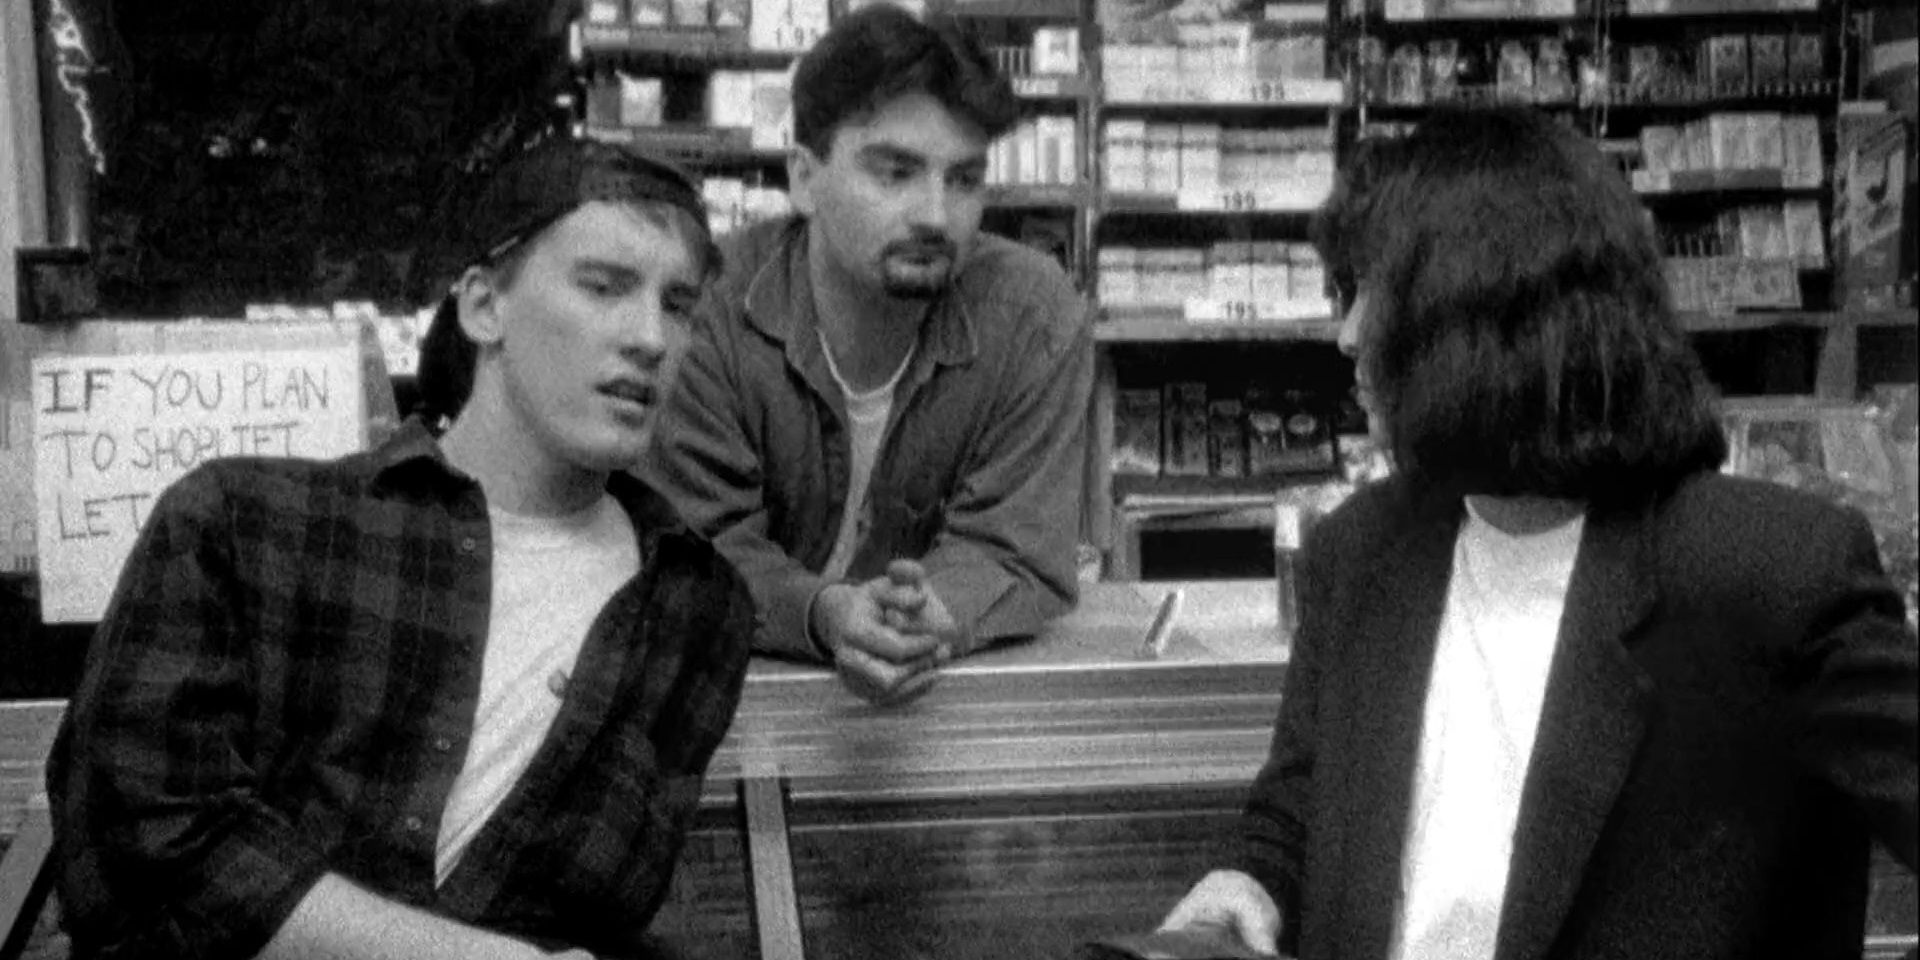 Kevin Smith's Clerks